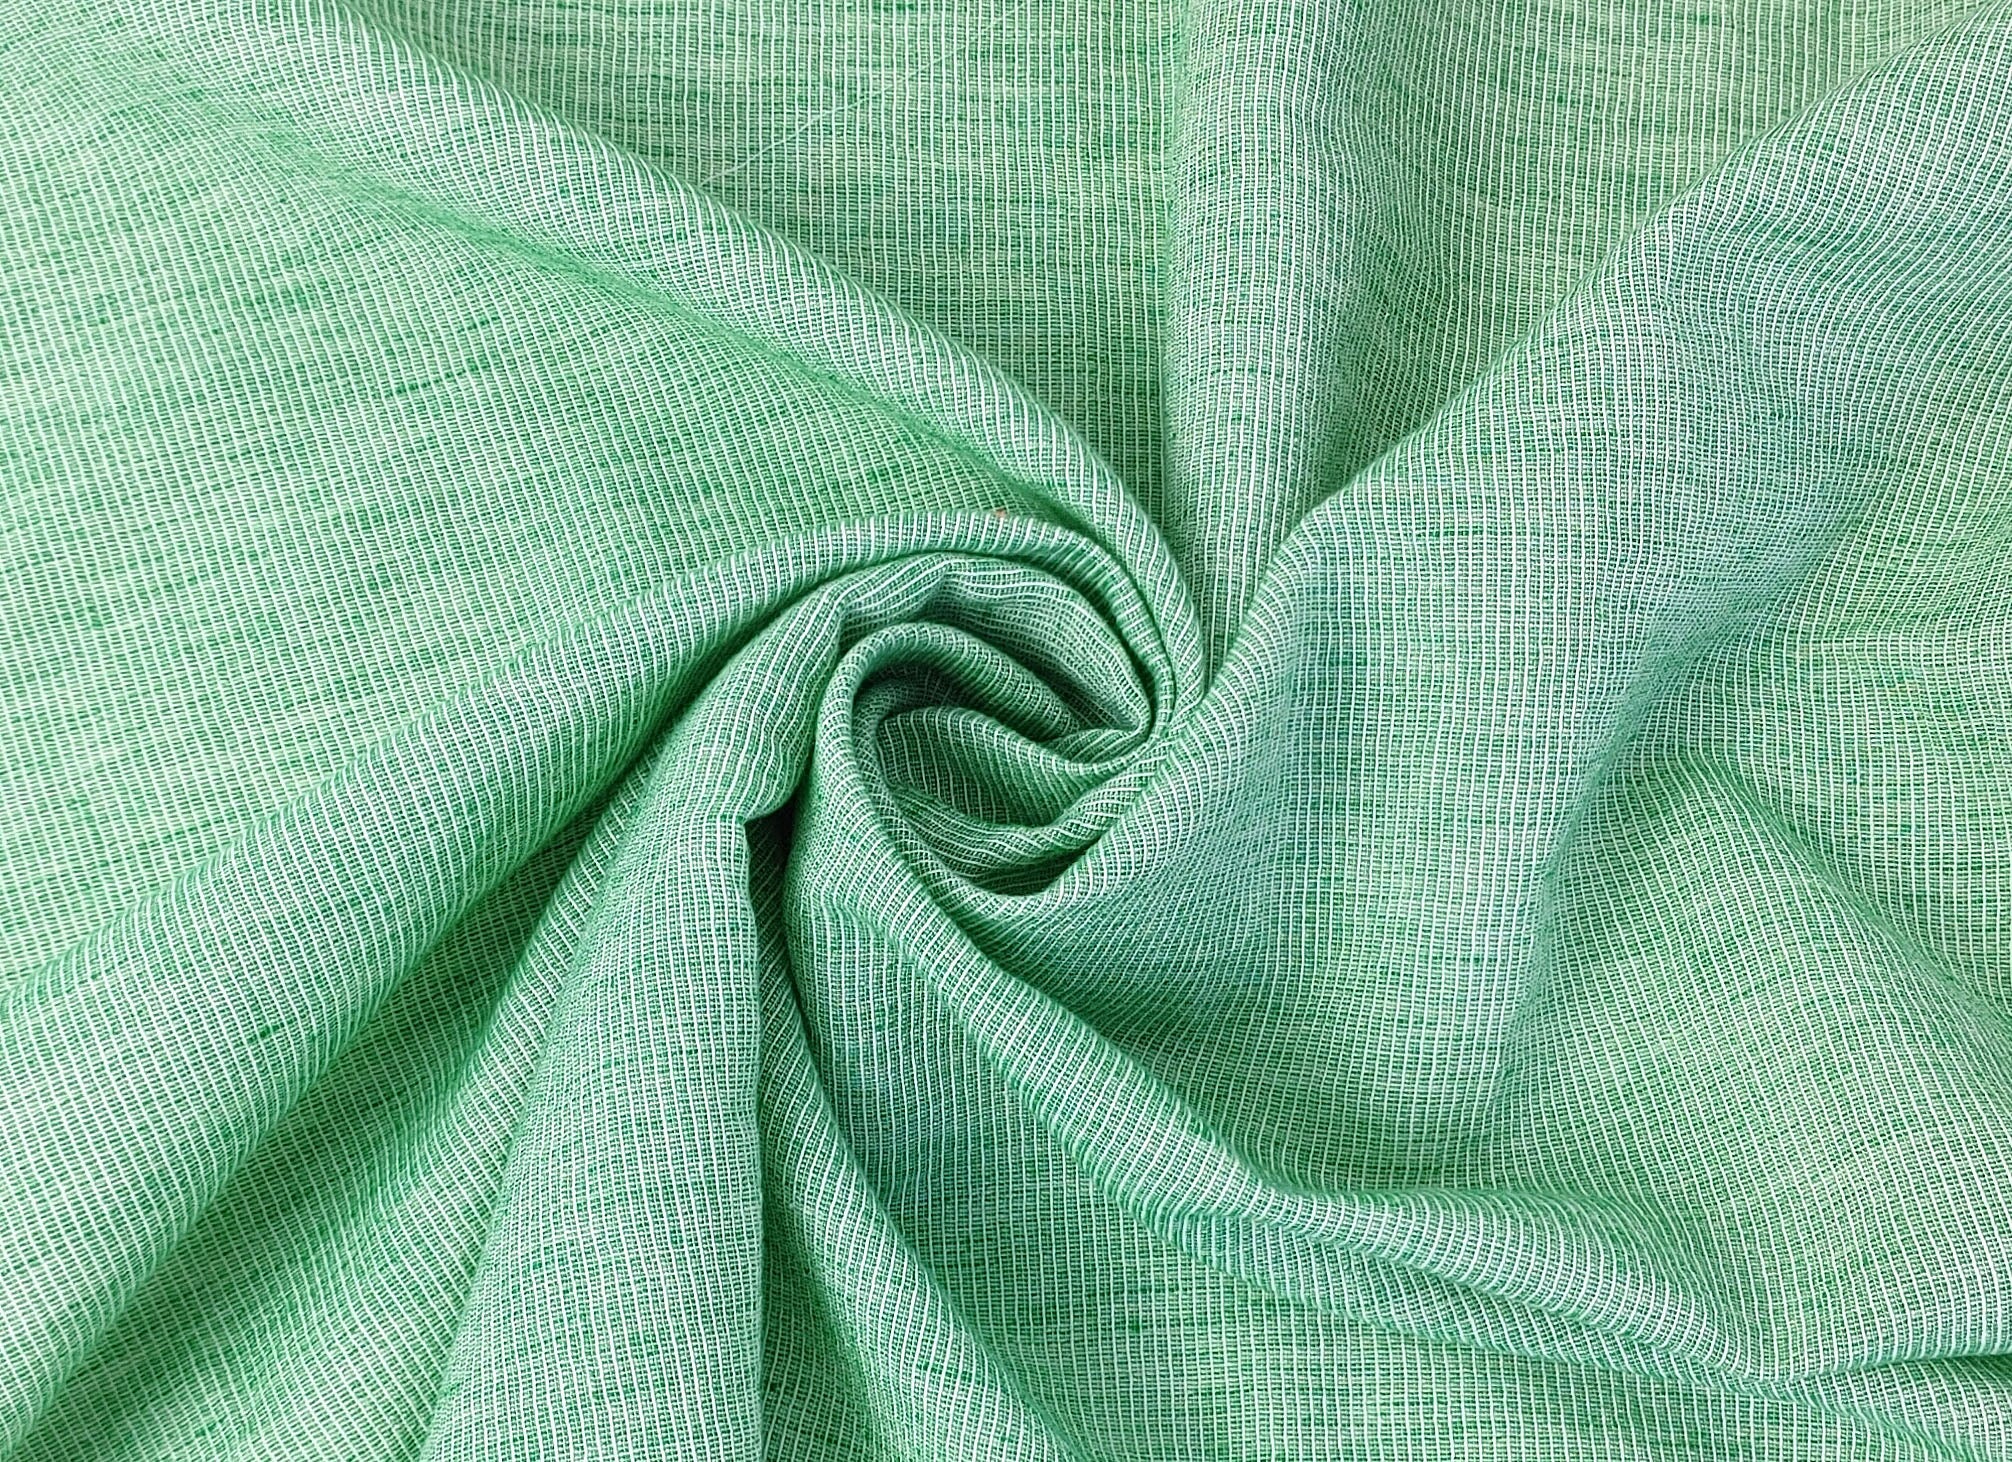 Light Weight Linen Cotton Stripe Fabric with Subtle Wrinkle Effect 7790 7791 7792 7793 7794 - The Linen Lab - Green